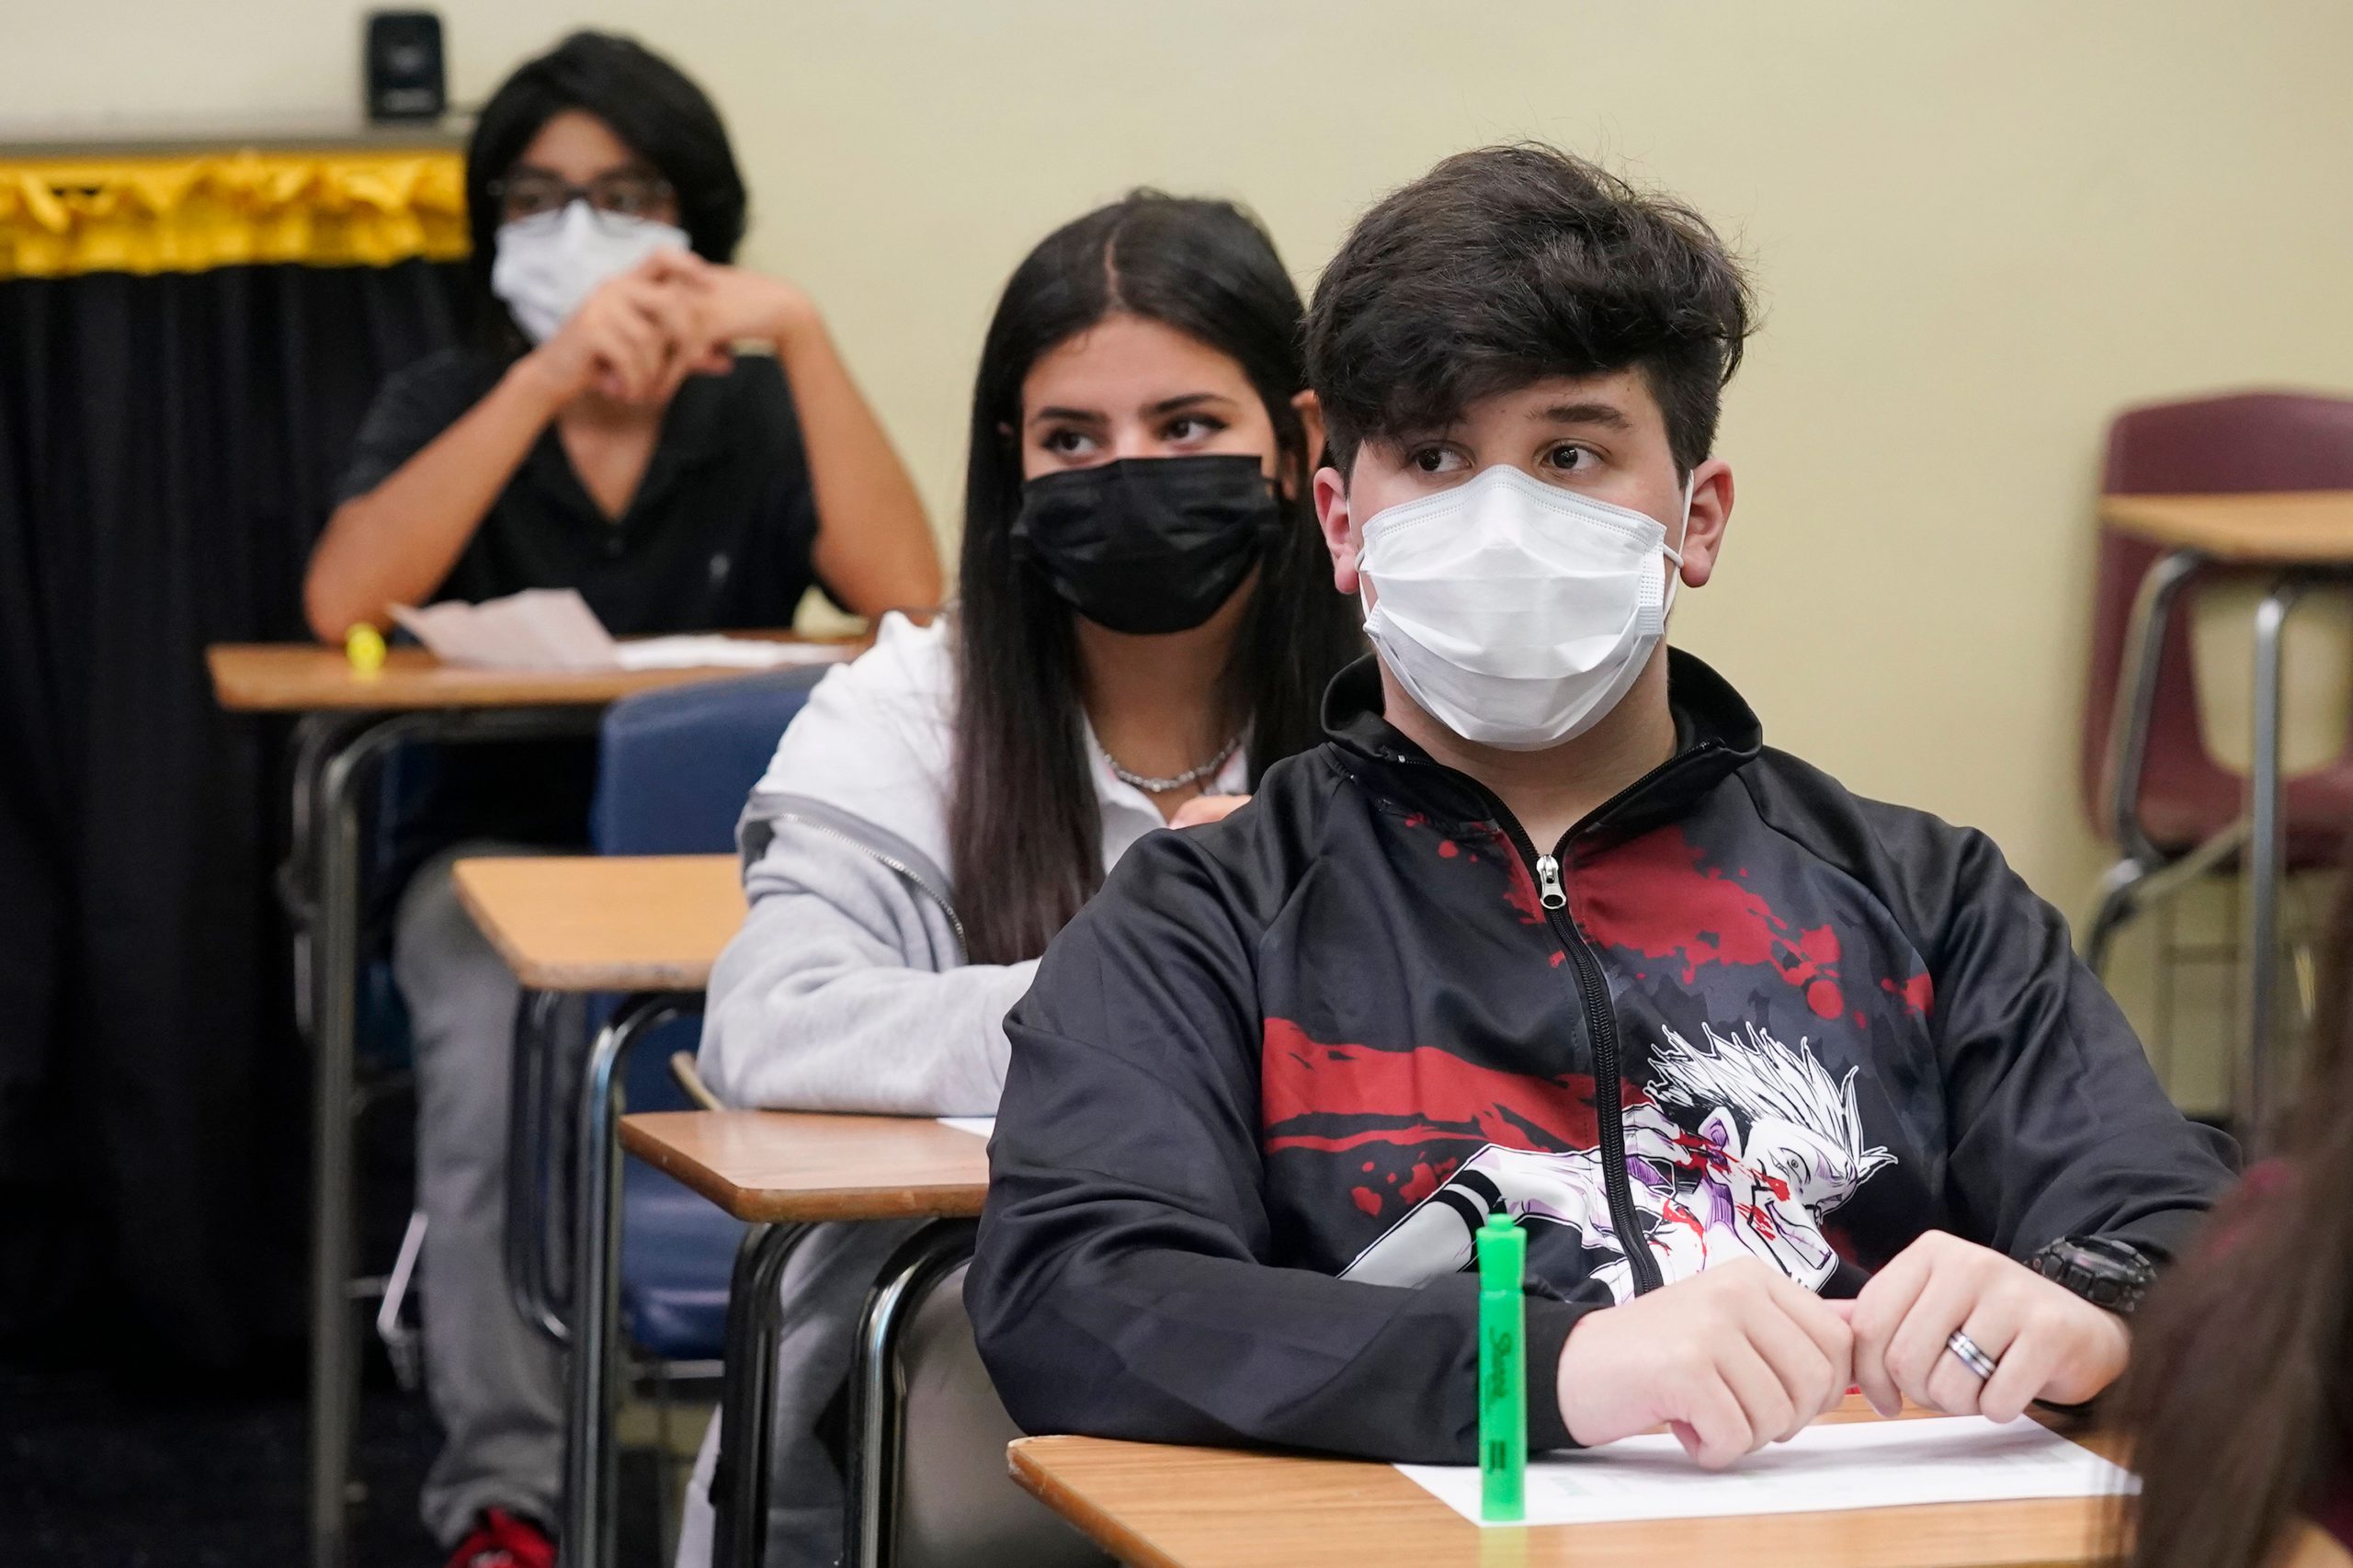 Illinois school district overturns mask-optional policy